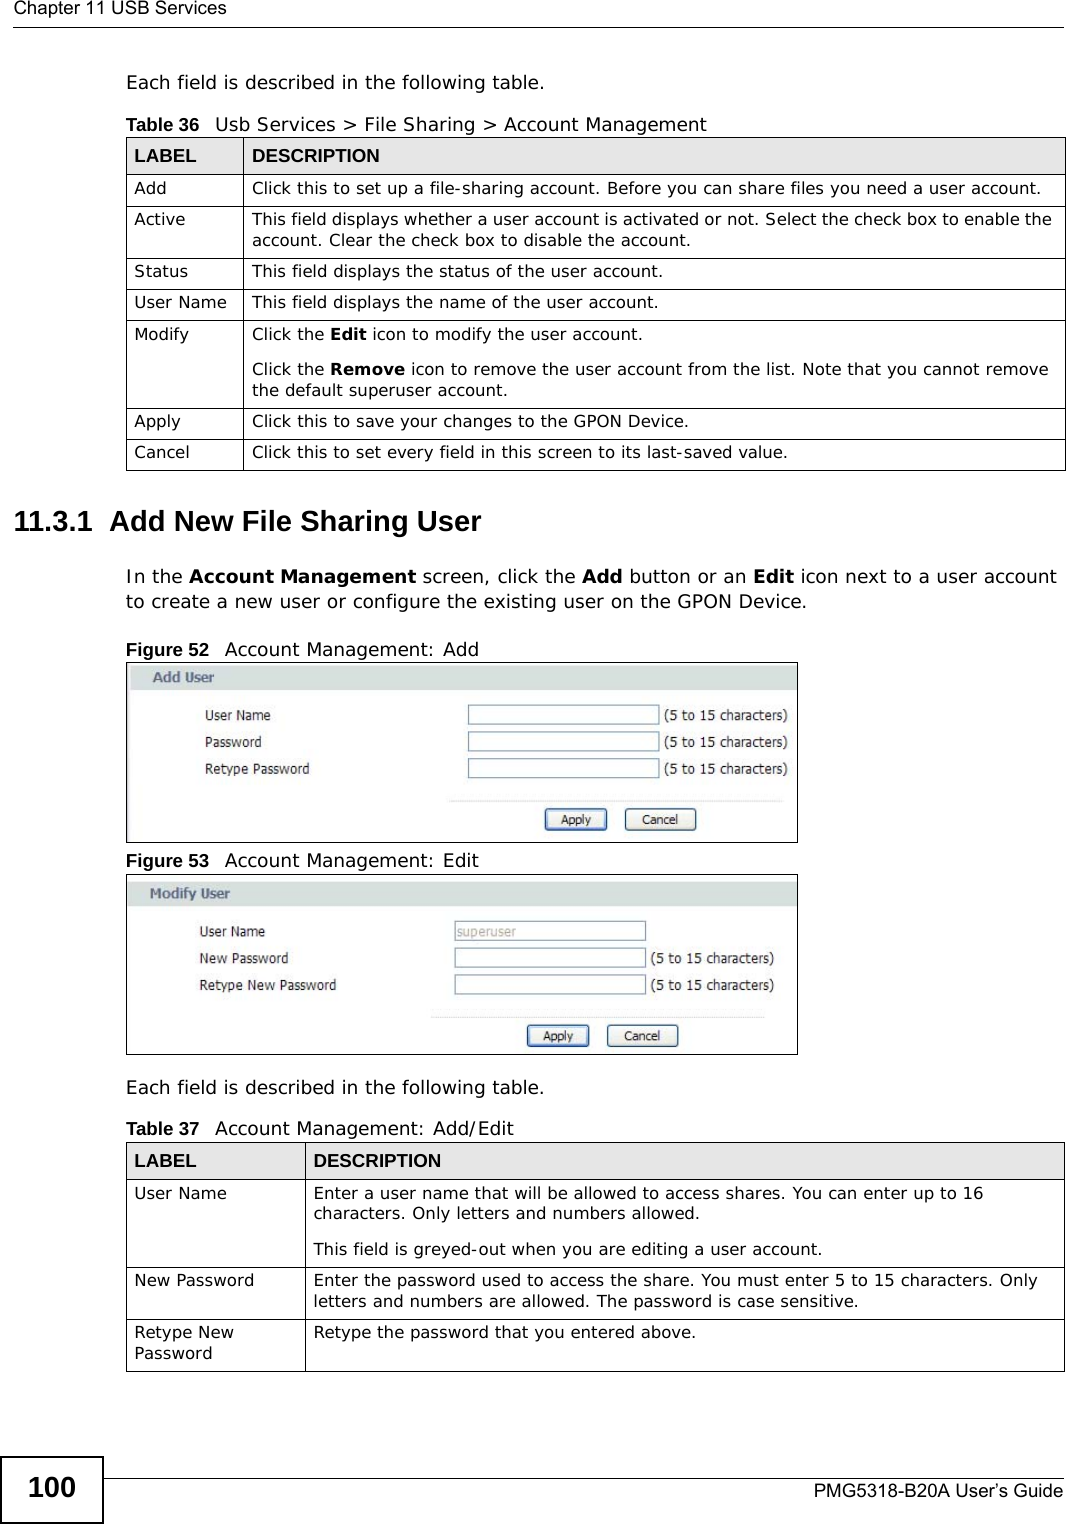 Chapter 11 USB ServicesPMG5318-B20A User’s Guide100Each field is described in the following table.11.3.1  Add New File Sharing UserIn the Account Management screen, click the Add button or an Edit icon next to a user account to create a new user or configure the existing user on the GPON Device. Figure 52   Account Management: AddFigure 53   Account Management: EditEach field is described in the following table.Table 36   Usb Services &gt; File Sharing &gt; Account Management LABEL DESCRIPTIONAdd Click this to set up a file-sharing account. Before you can share files you need a user account.Active This field displays whether a user account is activated or not. Select the check box to enable the account. Clear the check box to disable the account.Status This field displays the status of the user account.User Name This field displays the name of the user account.Modify Click the Edit icon to modify the user account.Click the Remove icon to remove the user account from the list. Note that you cannot remove the default superuser account.Apply Click this to save your changes to the GPON Device.Cancel Click this to set every field in this screen to its last-saved value.Table 37   Account Management: Add/Edit LABEL DESCRIPTIONUser Name Enter a user name that will be allowed to access shares. You can enter up to 16 characters. Only letters and numbers allowed. This field is greyed-out when you are editing a user account.New Password Enter the password used to access the share. You must enter 5 to 15 characters. Only letters and numbers are allowed. The password is case sensitive.Retype New Password Retype the password that you entered above.